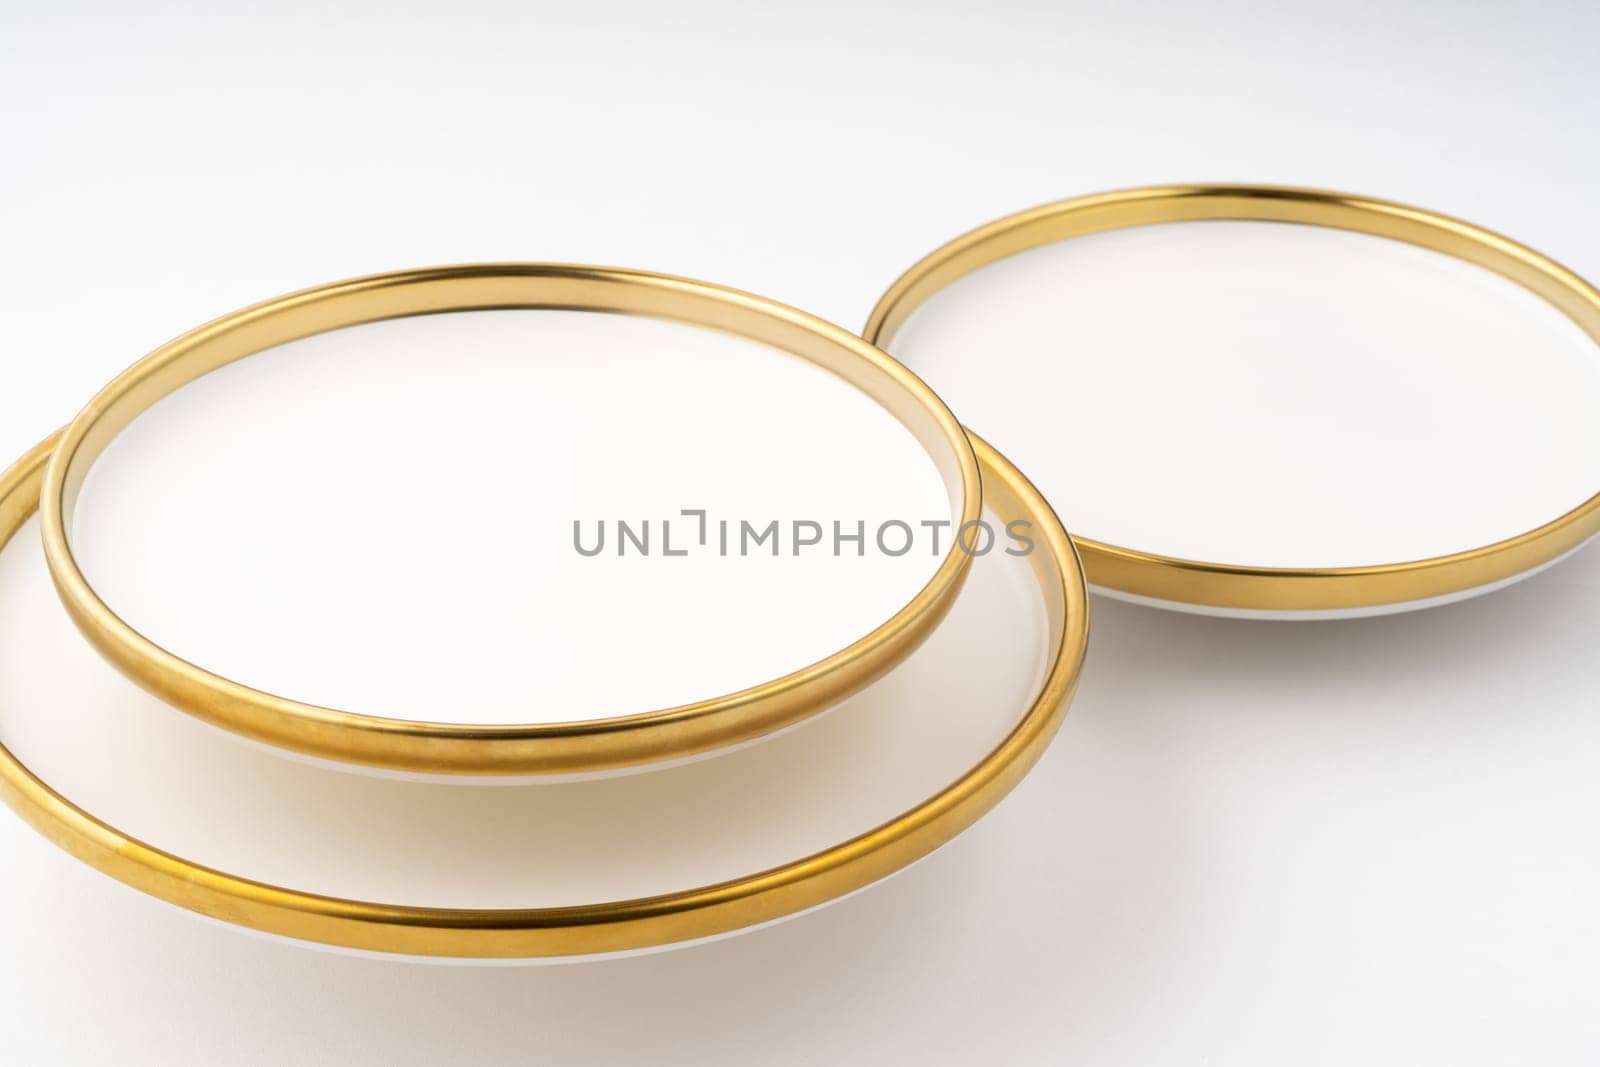 A set of white and brown ceramic plates on a white background by A_Karim